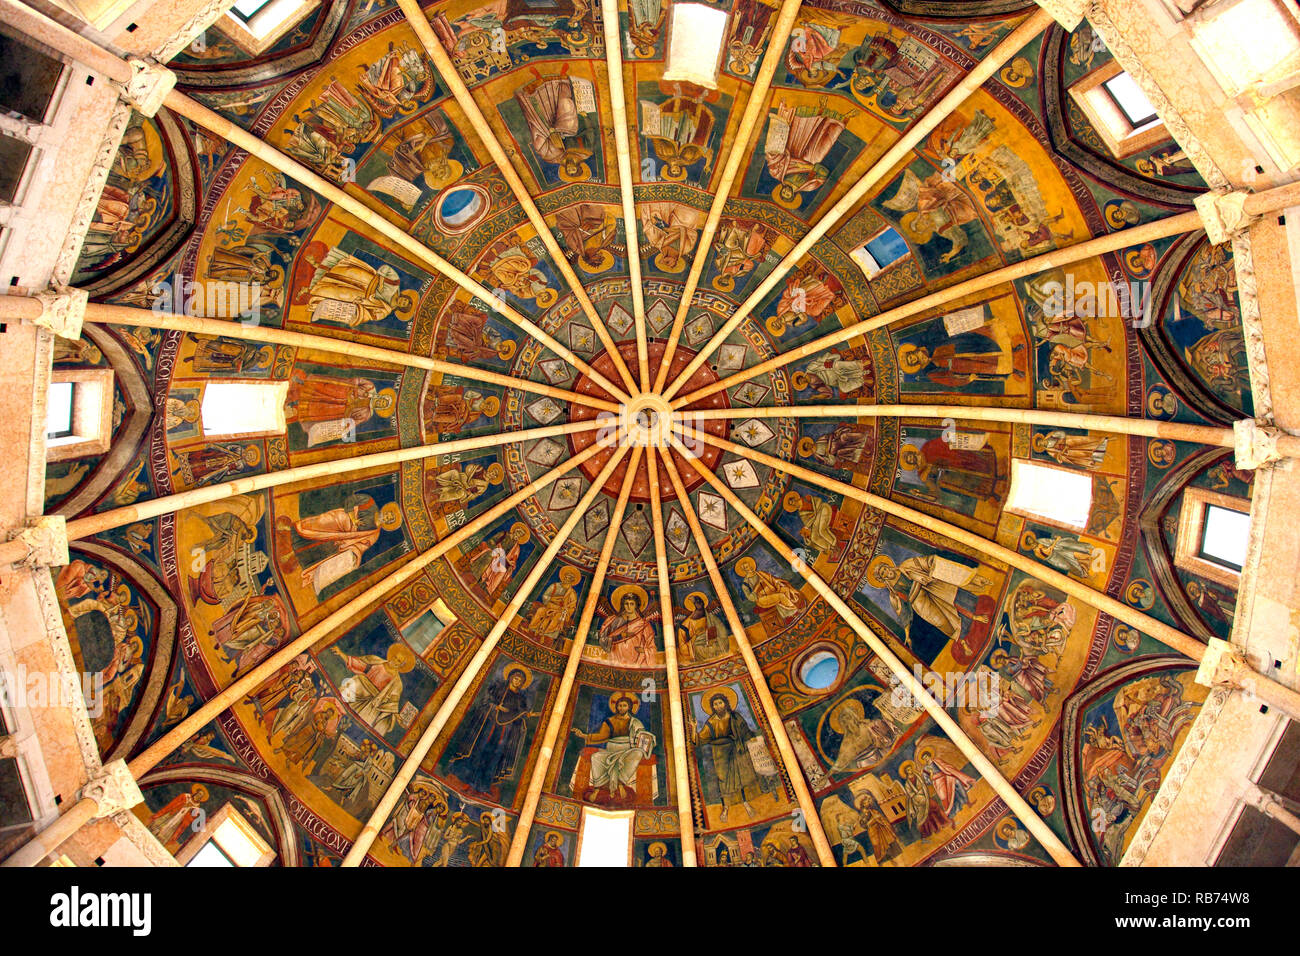 Domed ceiling of the Baptistery in Parma Italy. Stock Photo